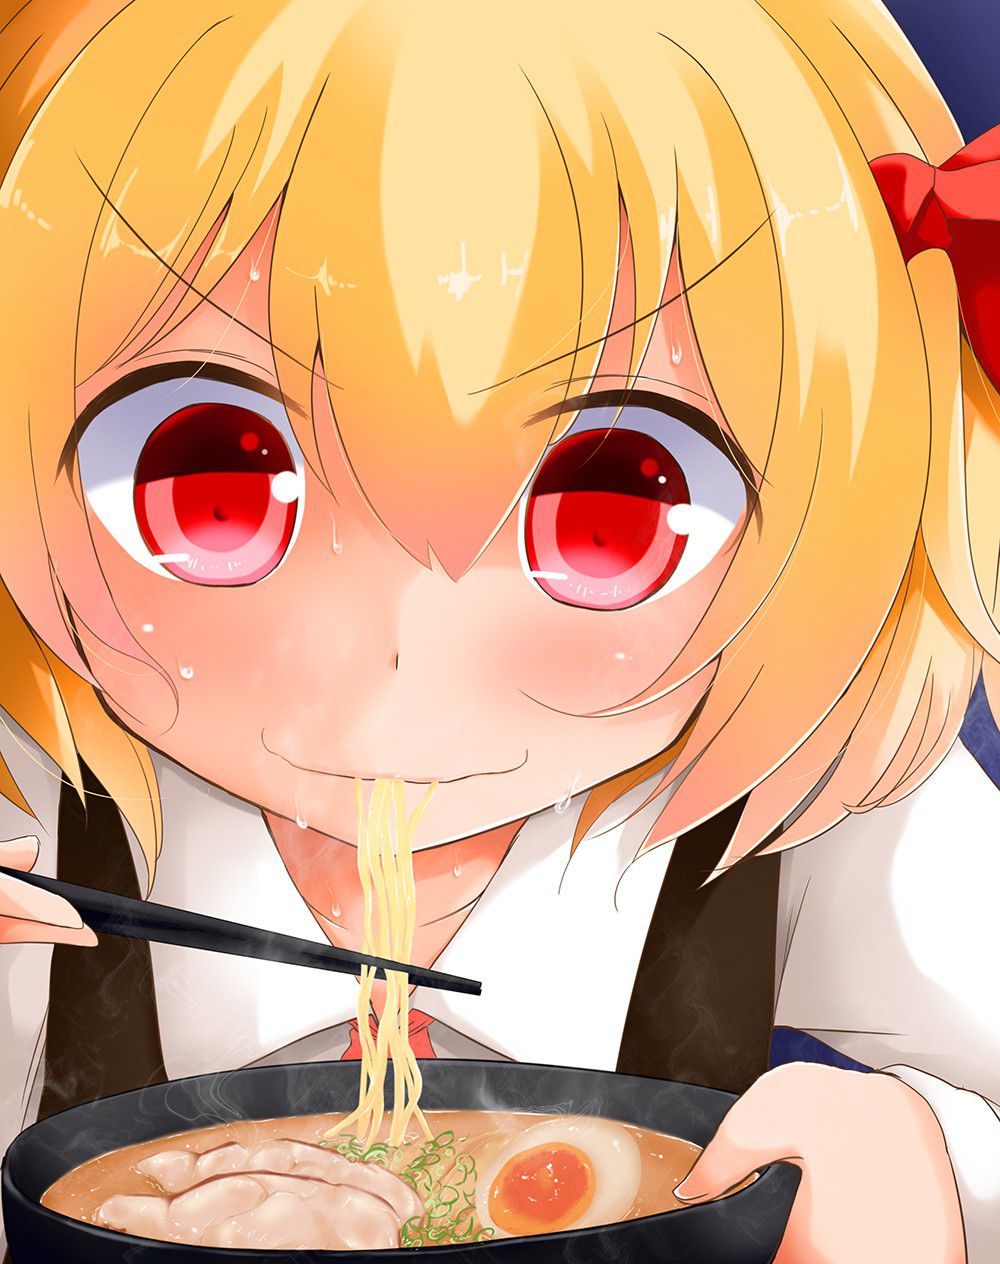 Secondary image summary of the girl eating delicious food! 1